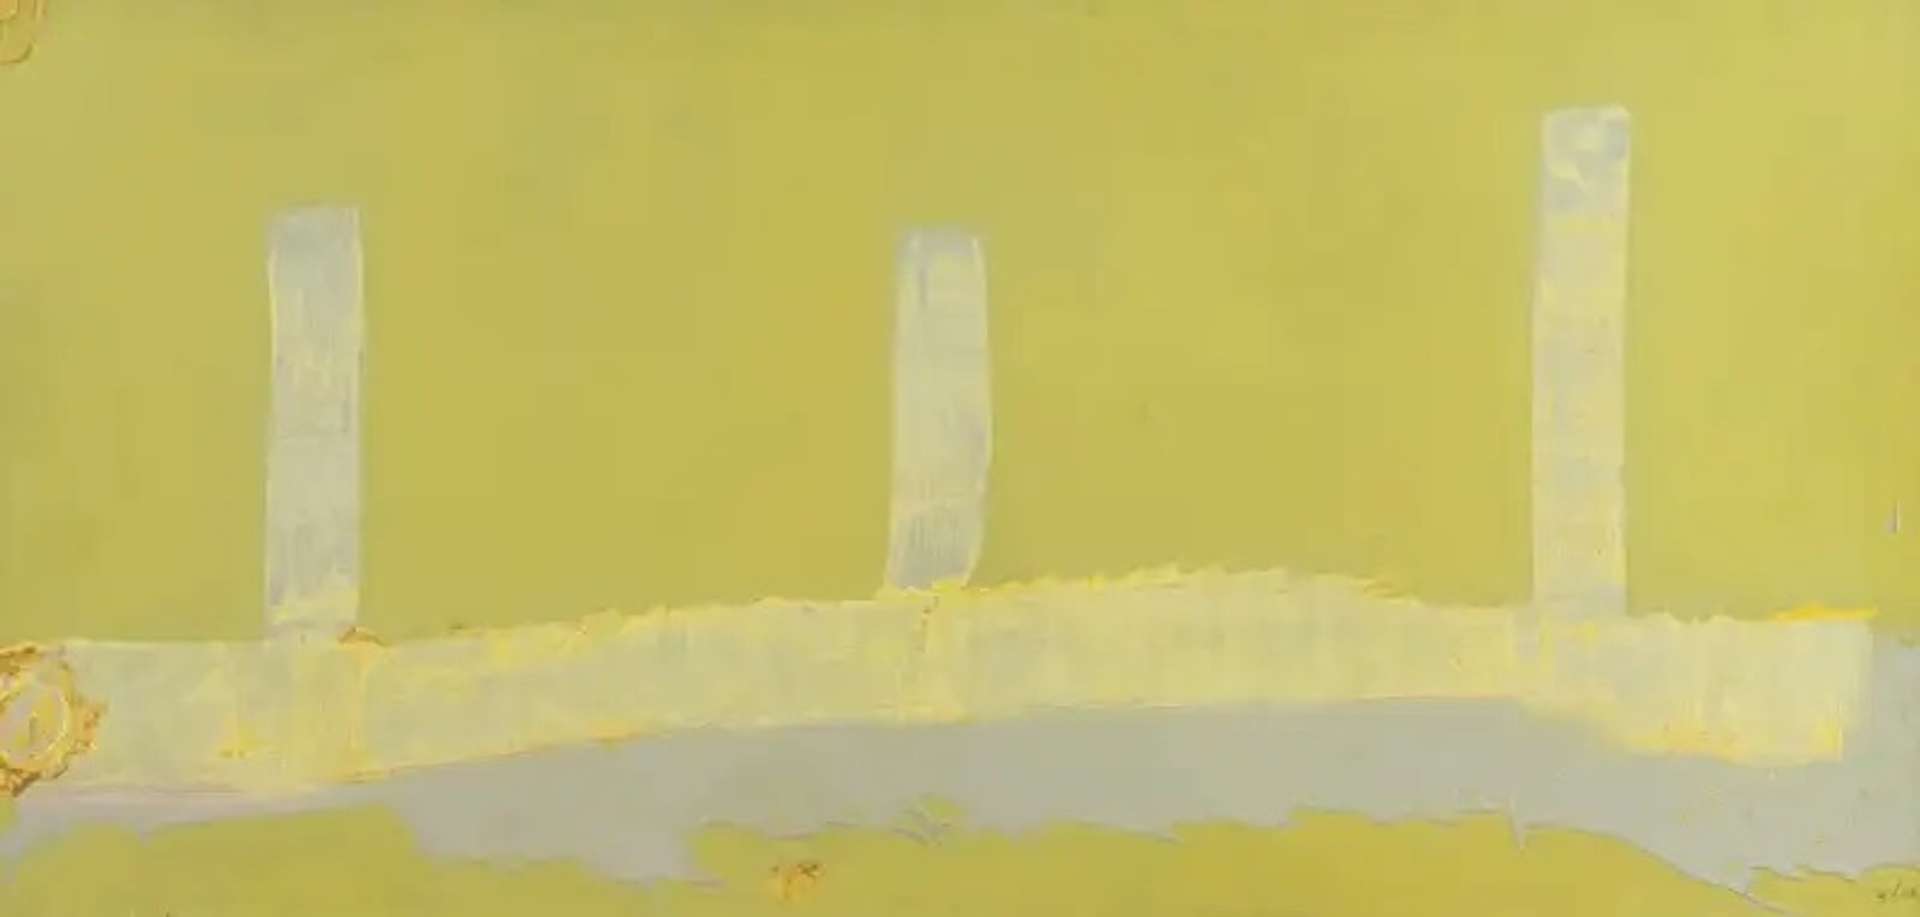 Helen Frankenthaler’s Hermes. An abstract expressionist relief print of an abstract yellow landscape.